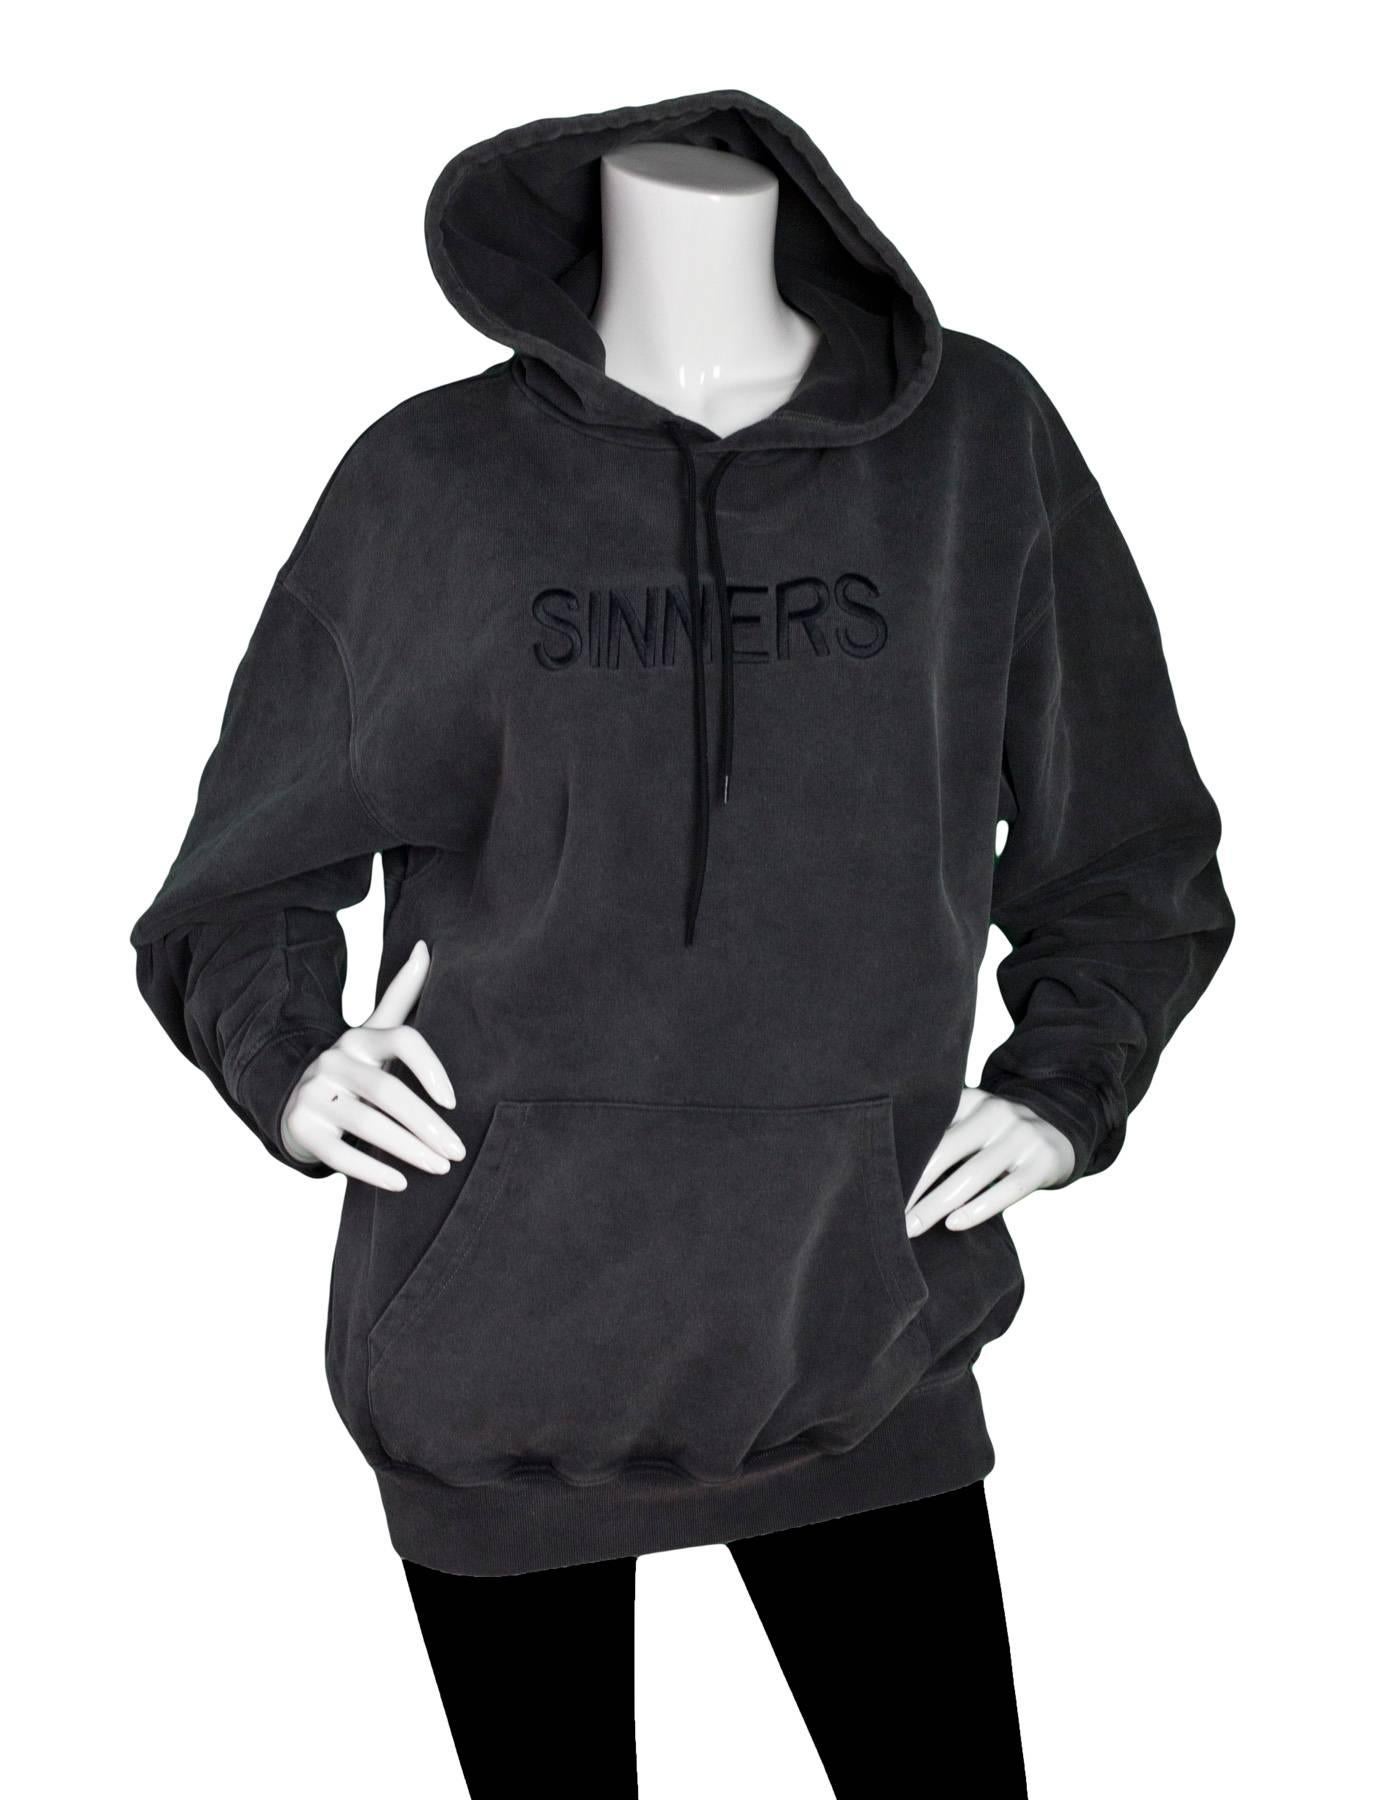 balenciaga sinners hoodie price, magnanimous disposition UP TO 59% OFF -  statehouse.gov.sl